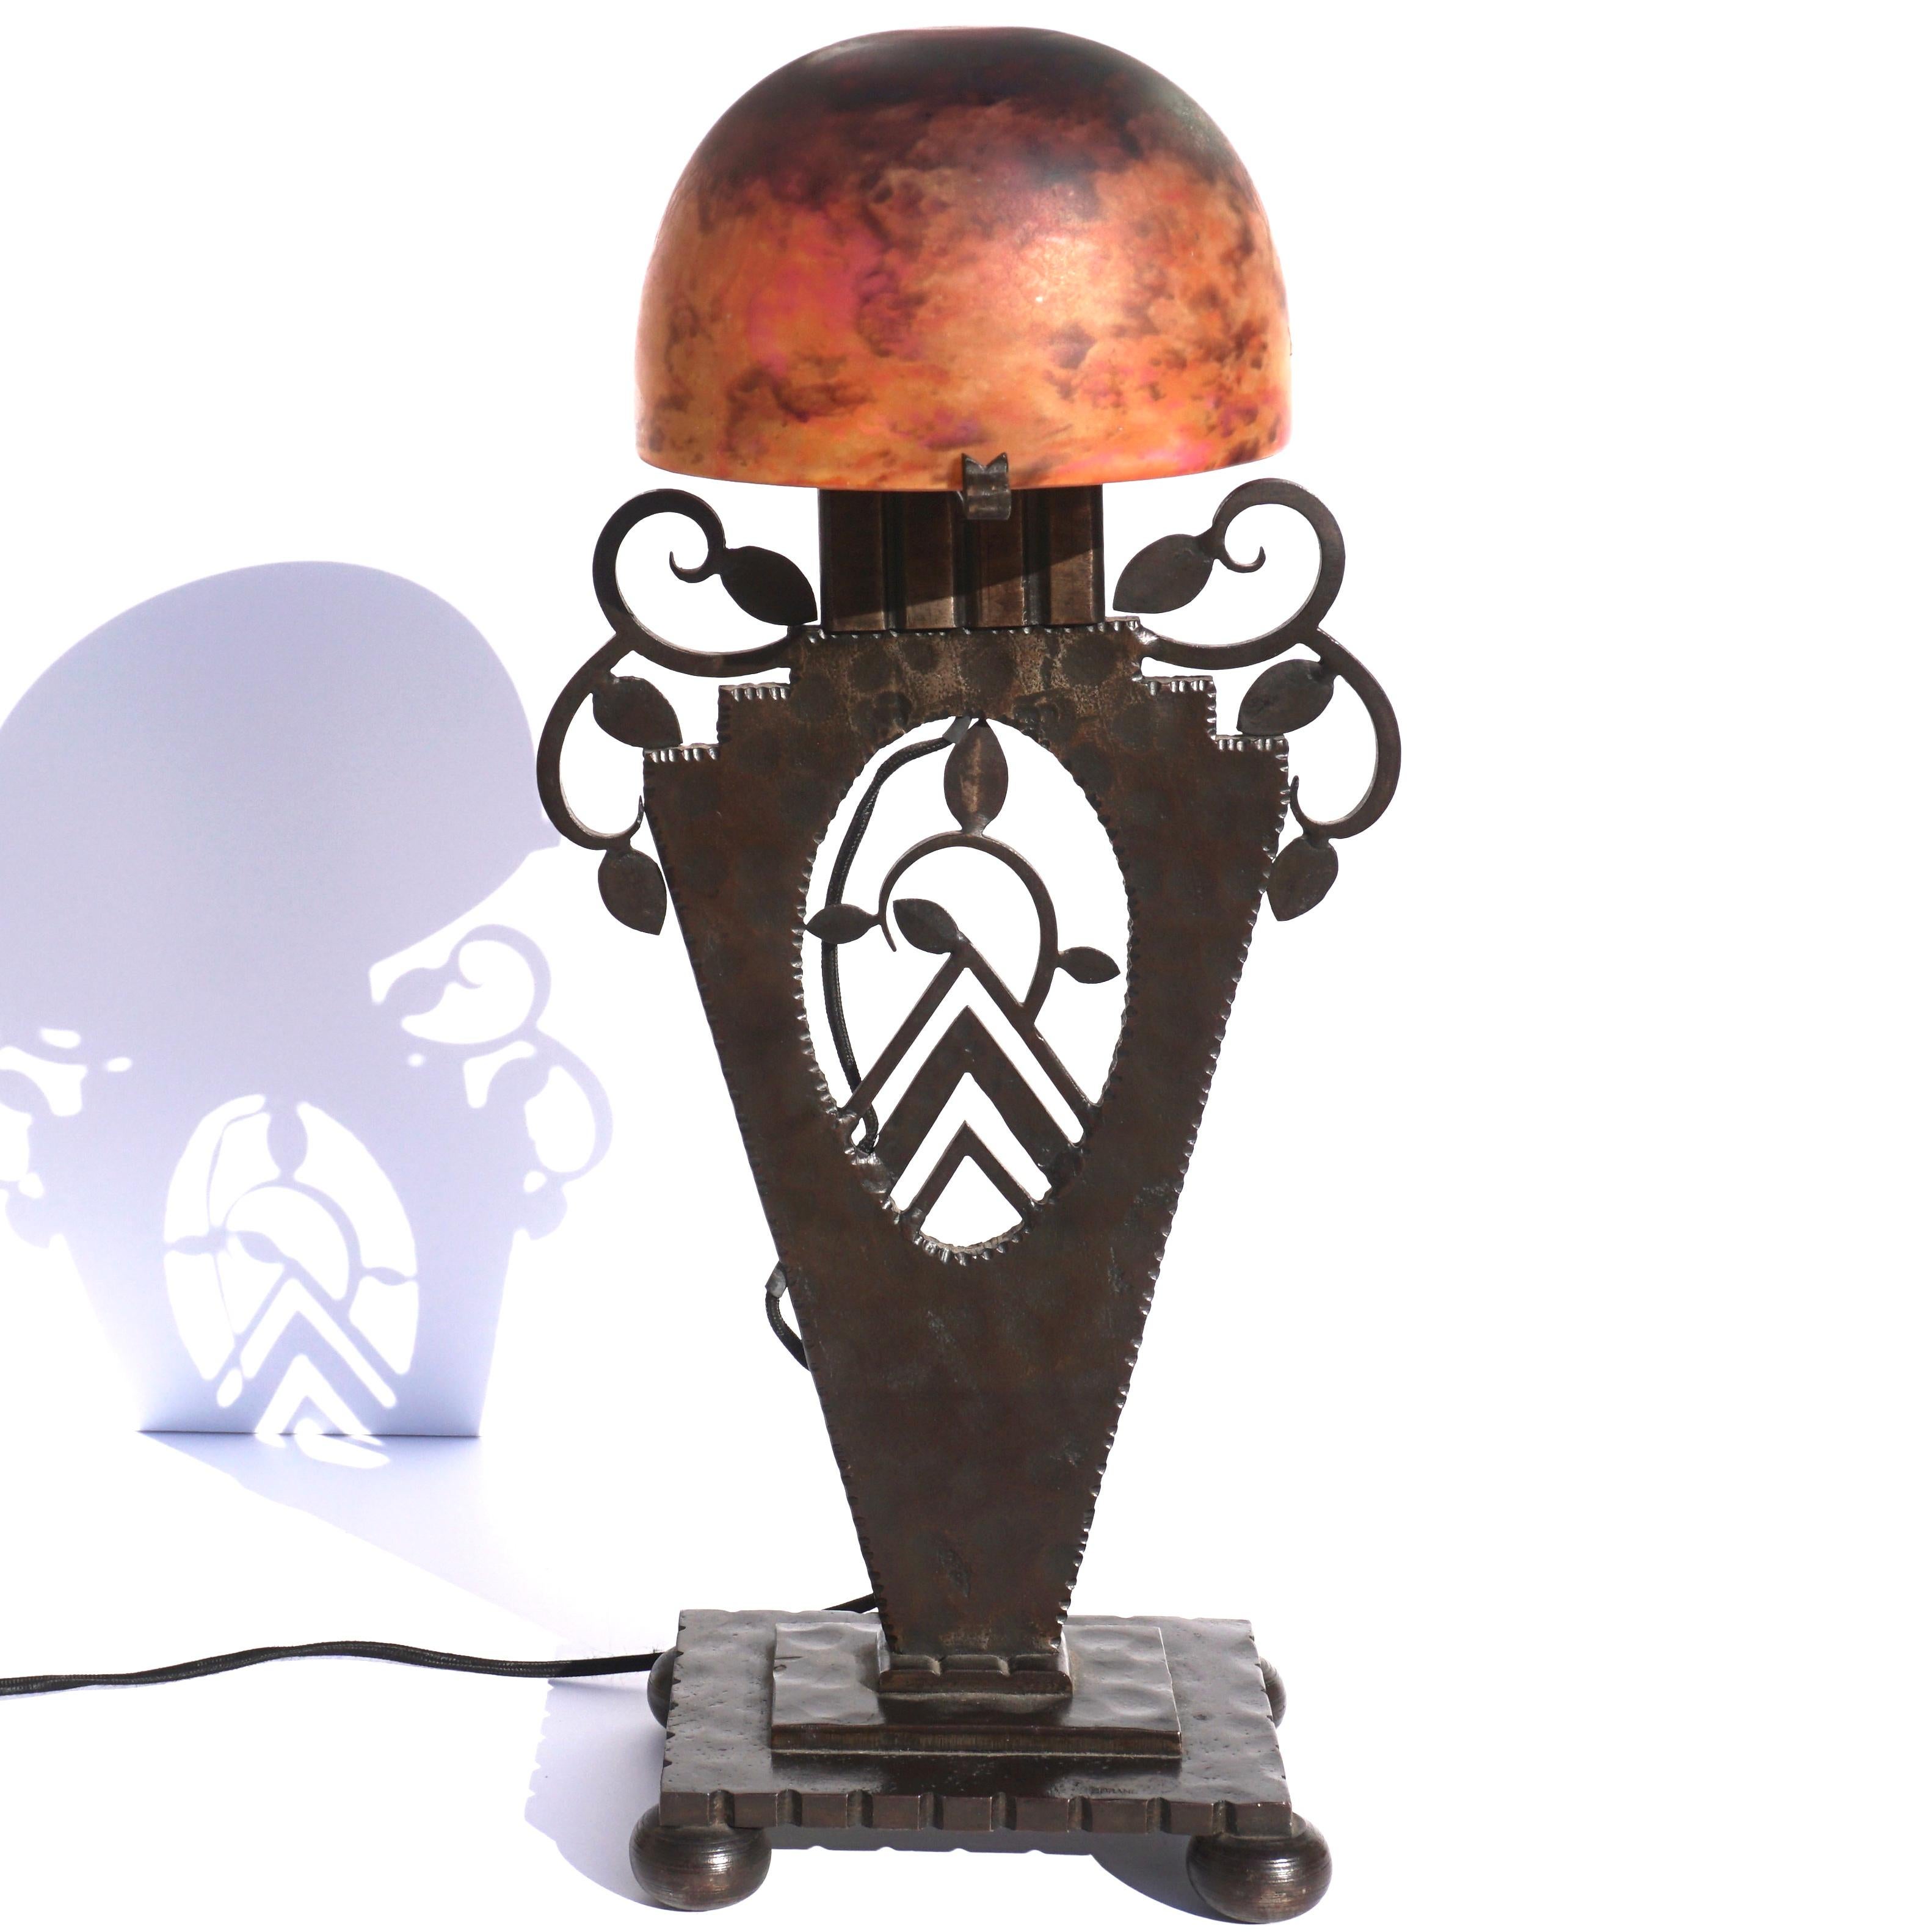 Daum Freres Nancy; Edgar Brandt, Table light, circa 1925, 

Daum Nancy shade is variegated and mottled art glass with powder fusions of, white, orange, red and violet. Wrought, forged iron patinated base has Art Deco decorations of leaves and